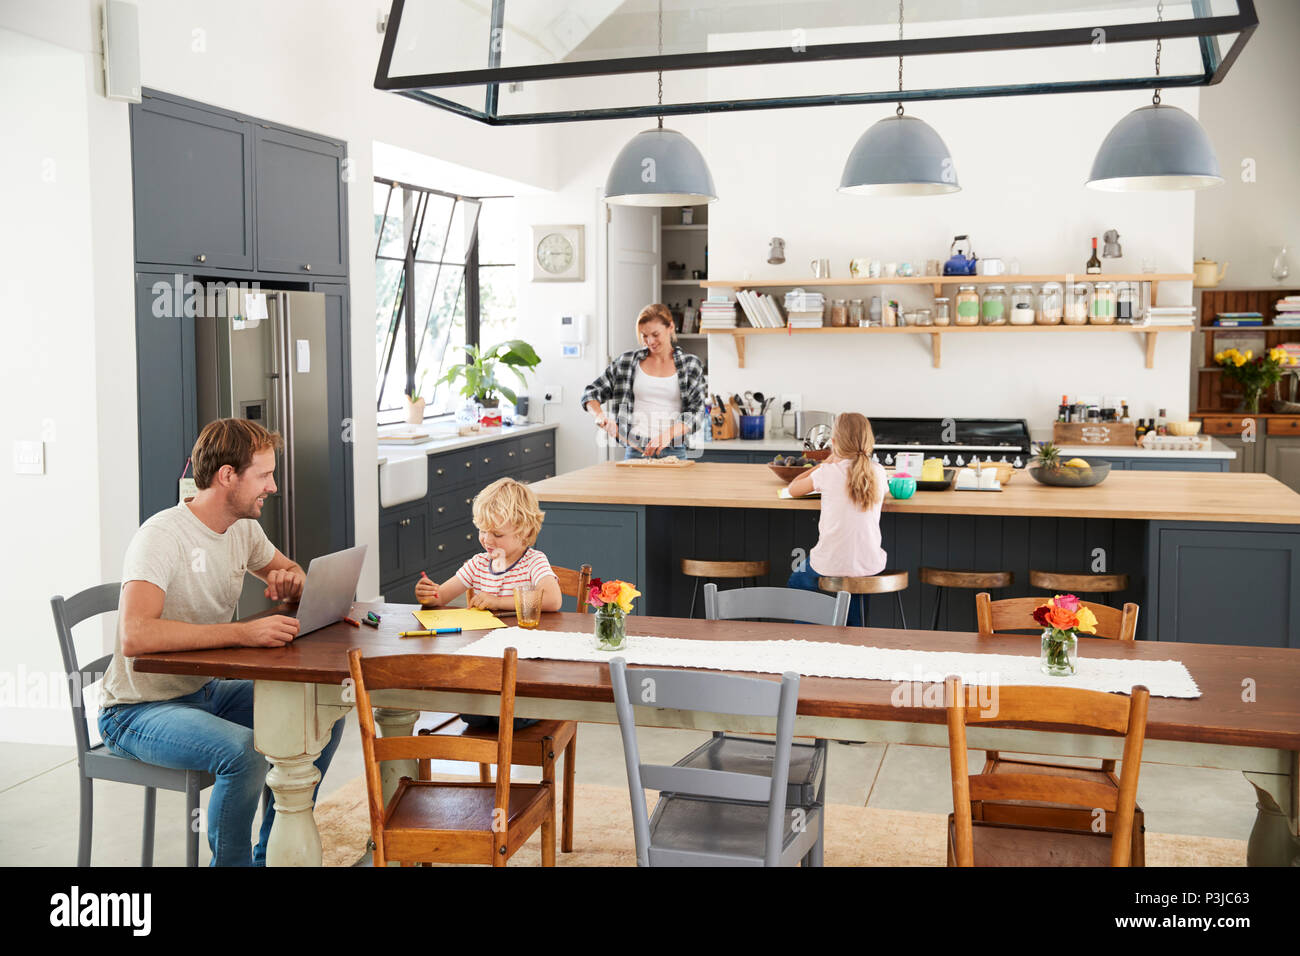 Young white family busy in their kitchen, elevated view Stock Photo